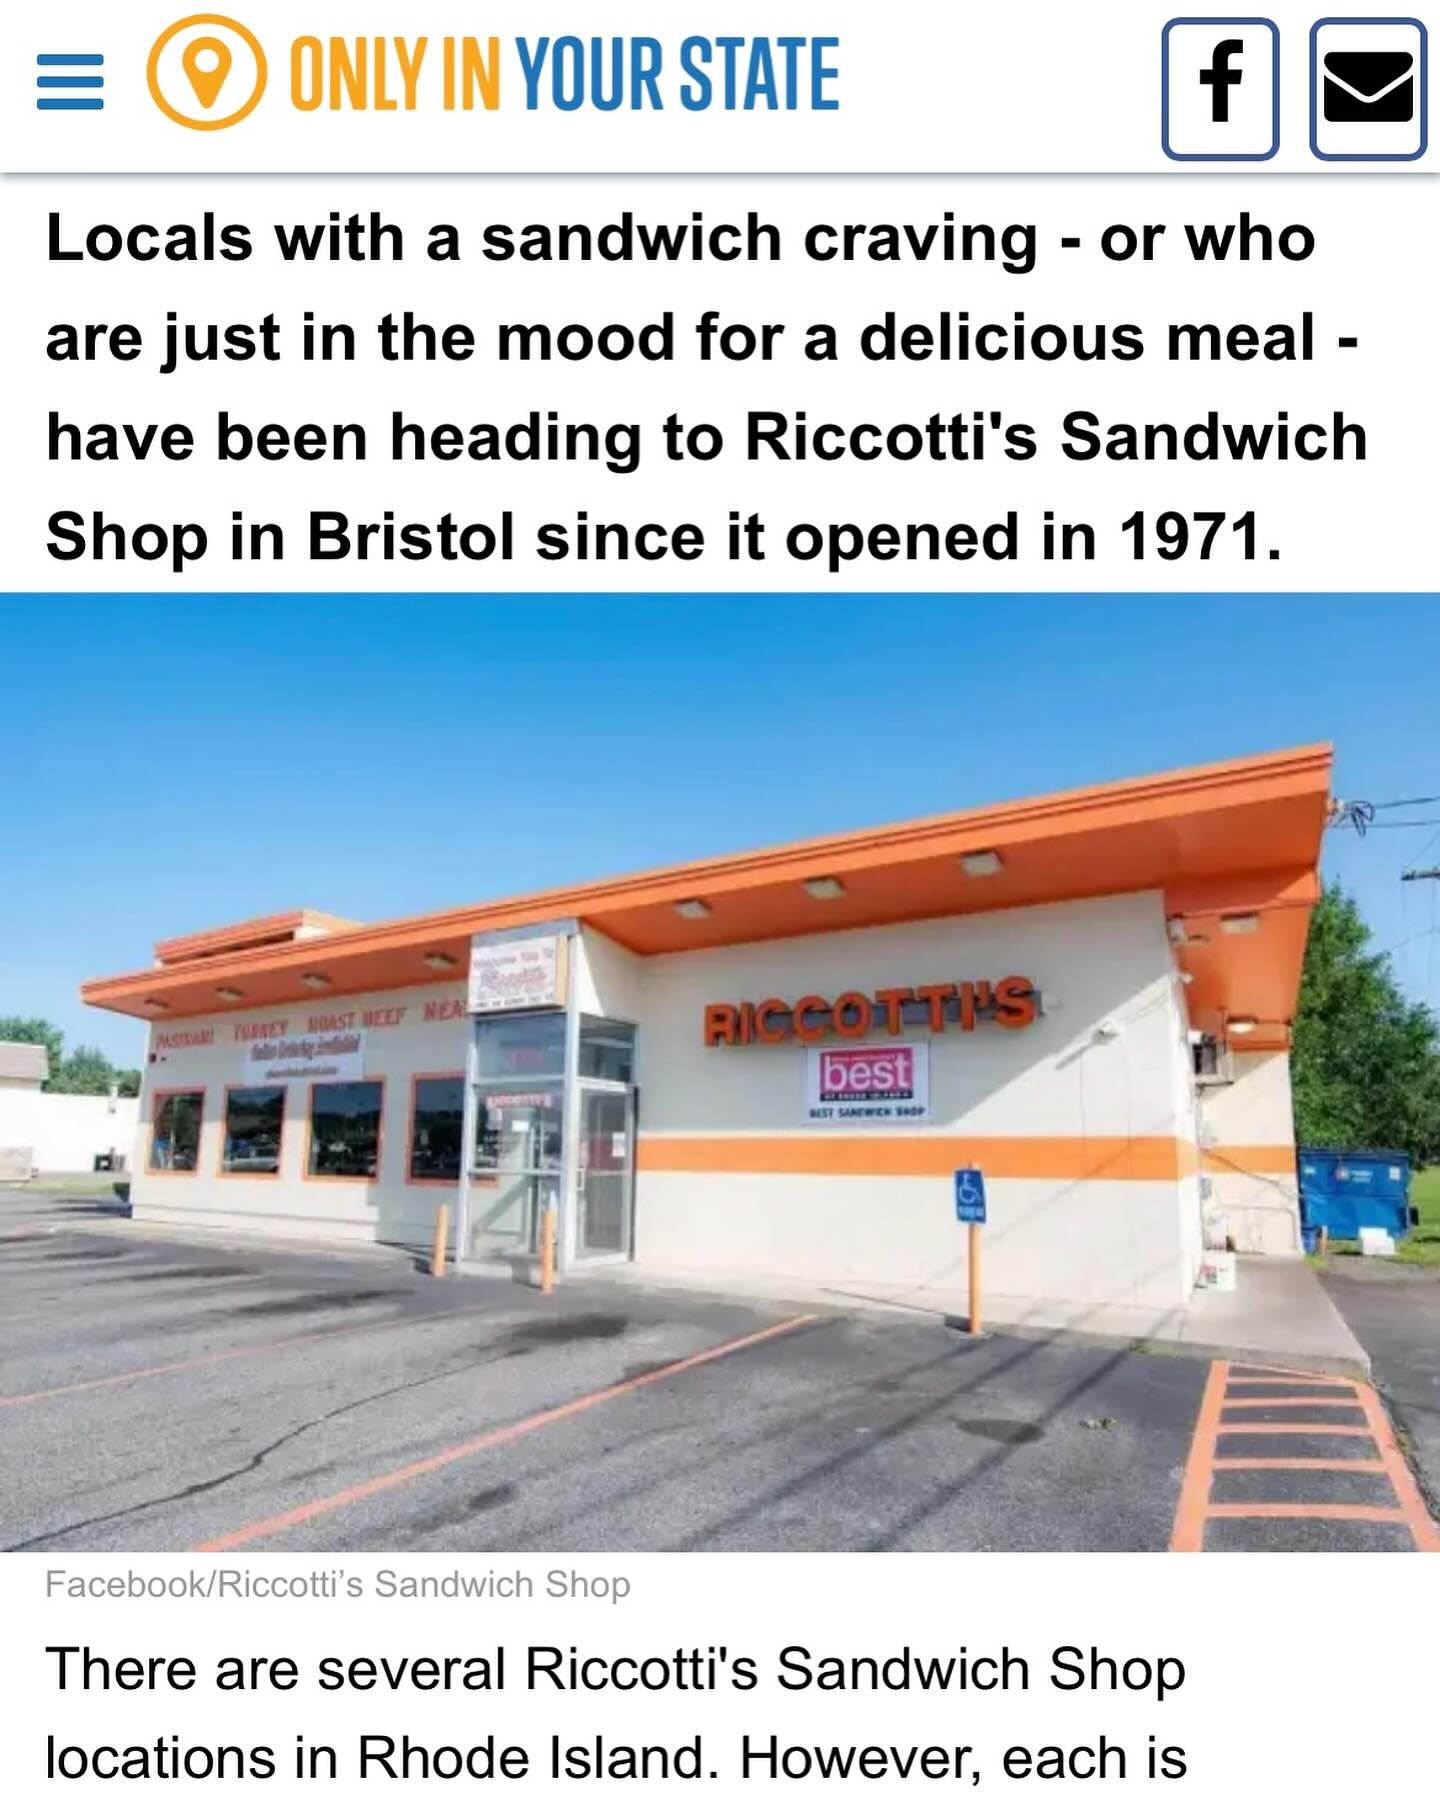 Thanks for the great write up @only_in_rhode_island! Check them out for some great ideas on must-visit spots and local gems! 

Check out the article below:

https://www.onlyinyourstate.com/rhode-island/restaurant-with-massive-sandwiches-ri/amp/

#ric